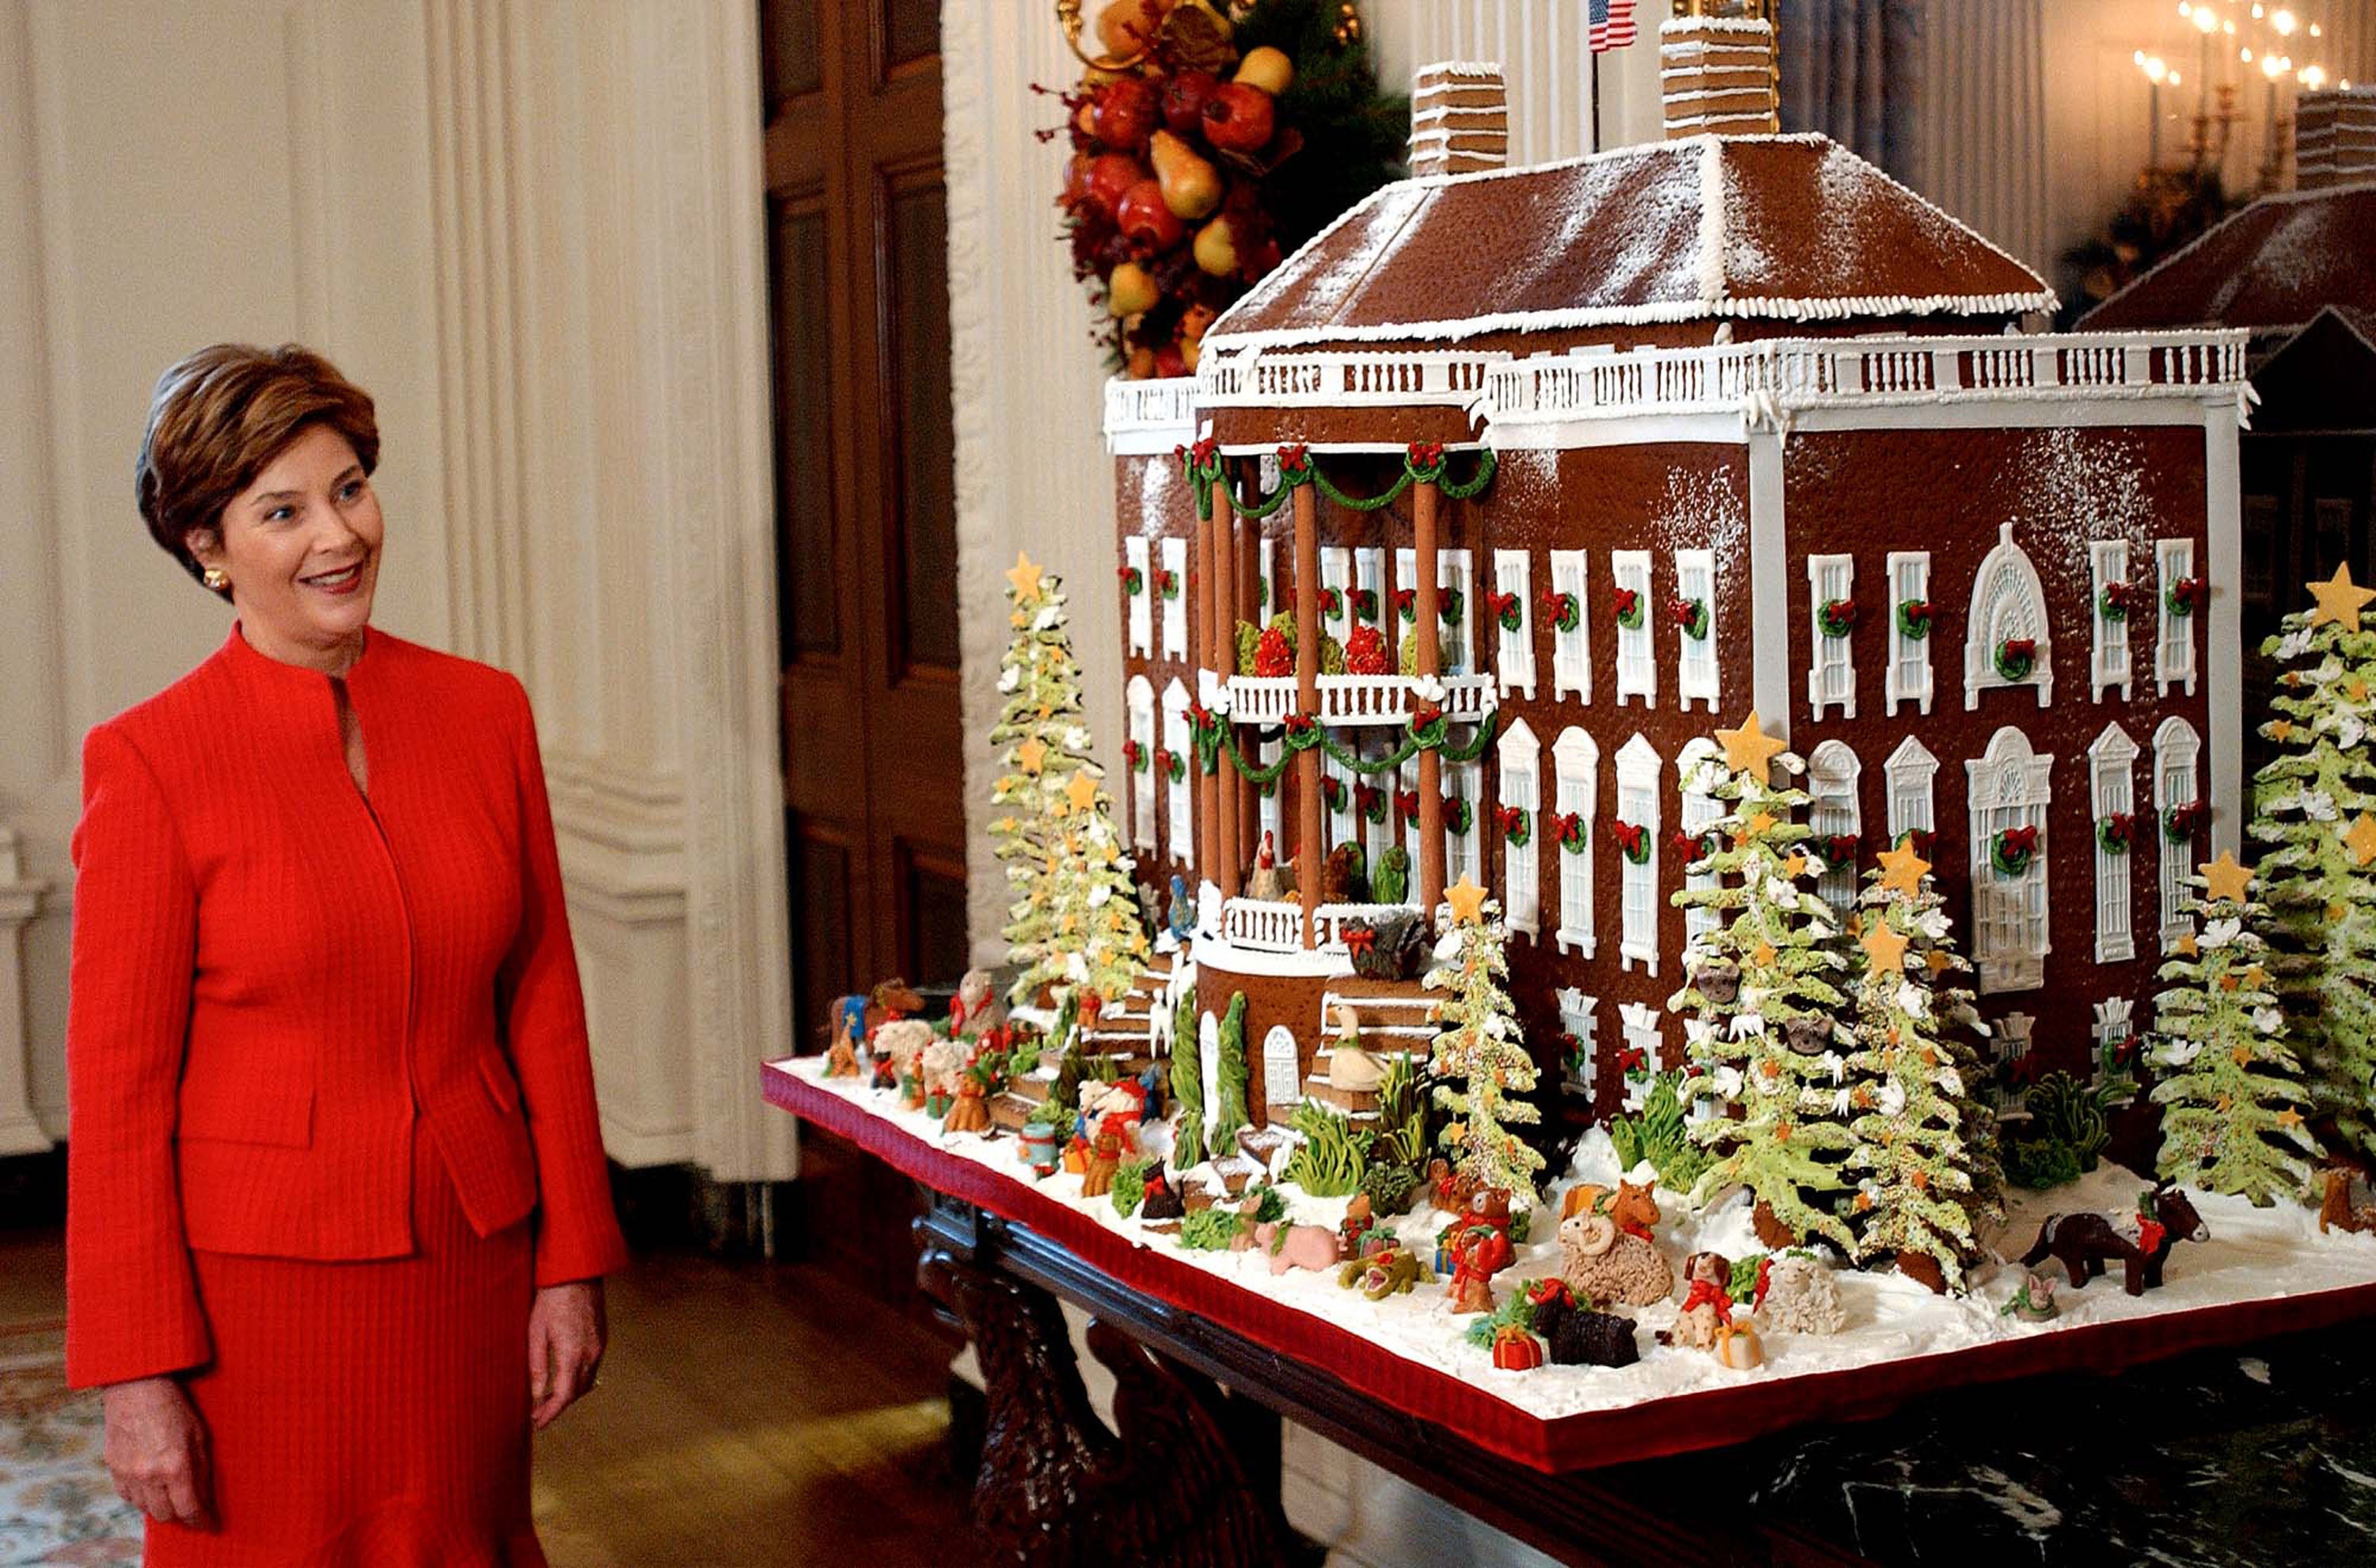 The White House decorates with a gingerbread house each year